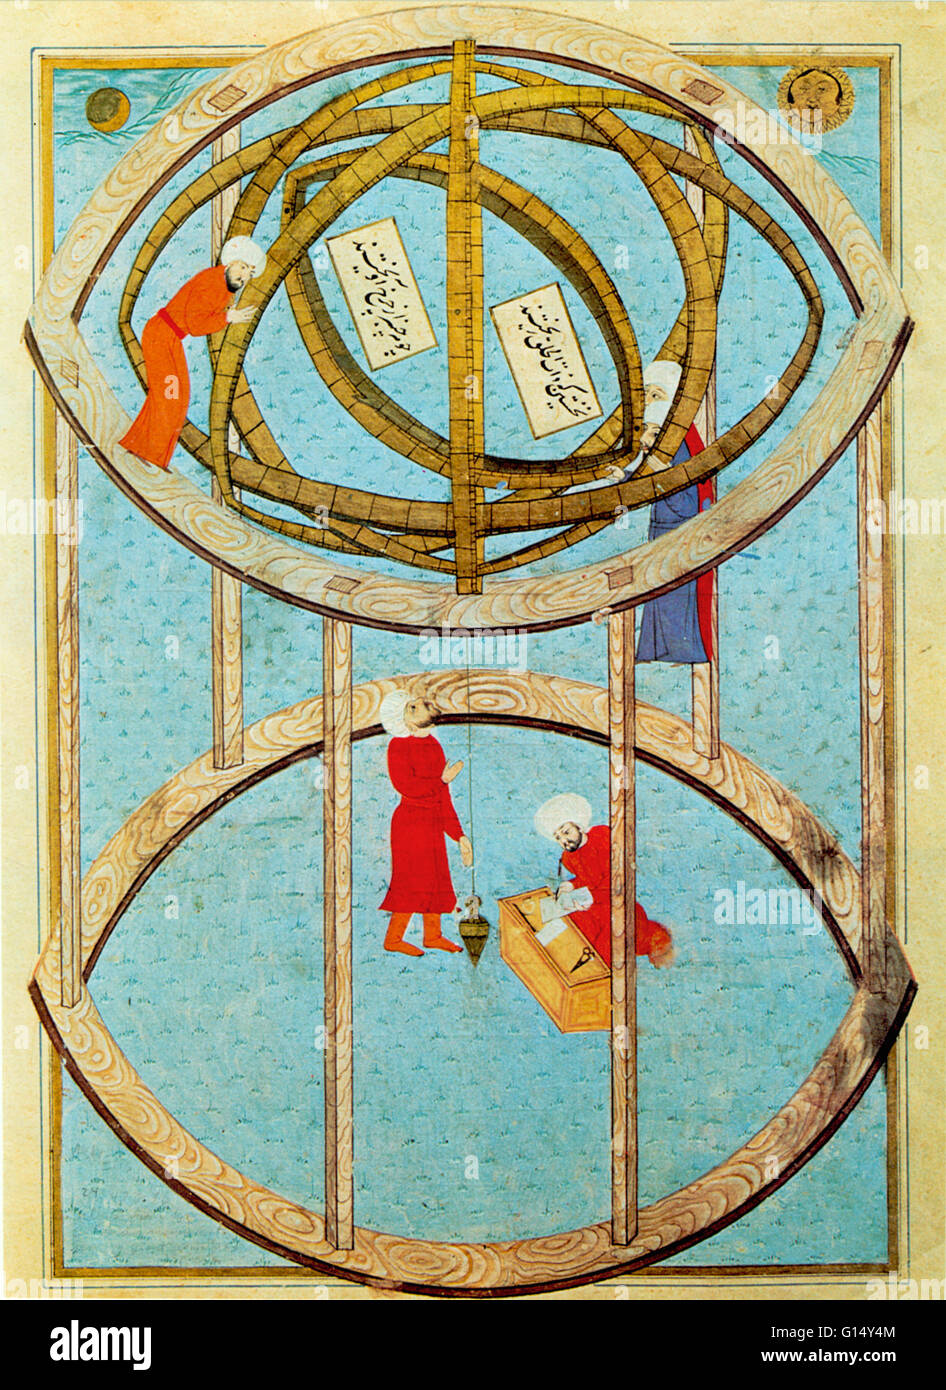 Illustration from a 16th century Ottoman manuscript showing a giant armillary sphere (also known as spherical astrolabe, armilla, or armil), which is a model of the celestial sphere. Stock Photo